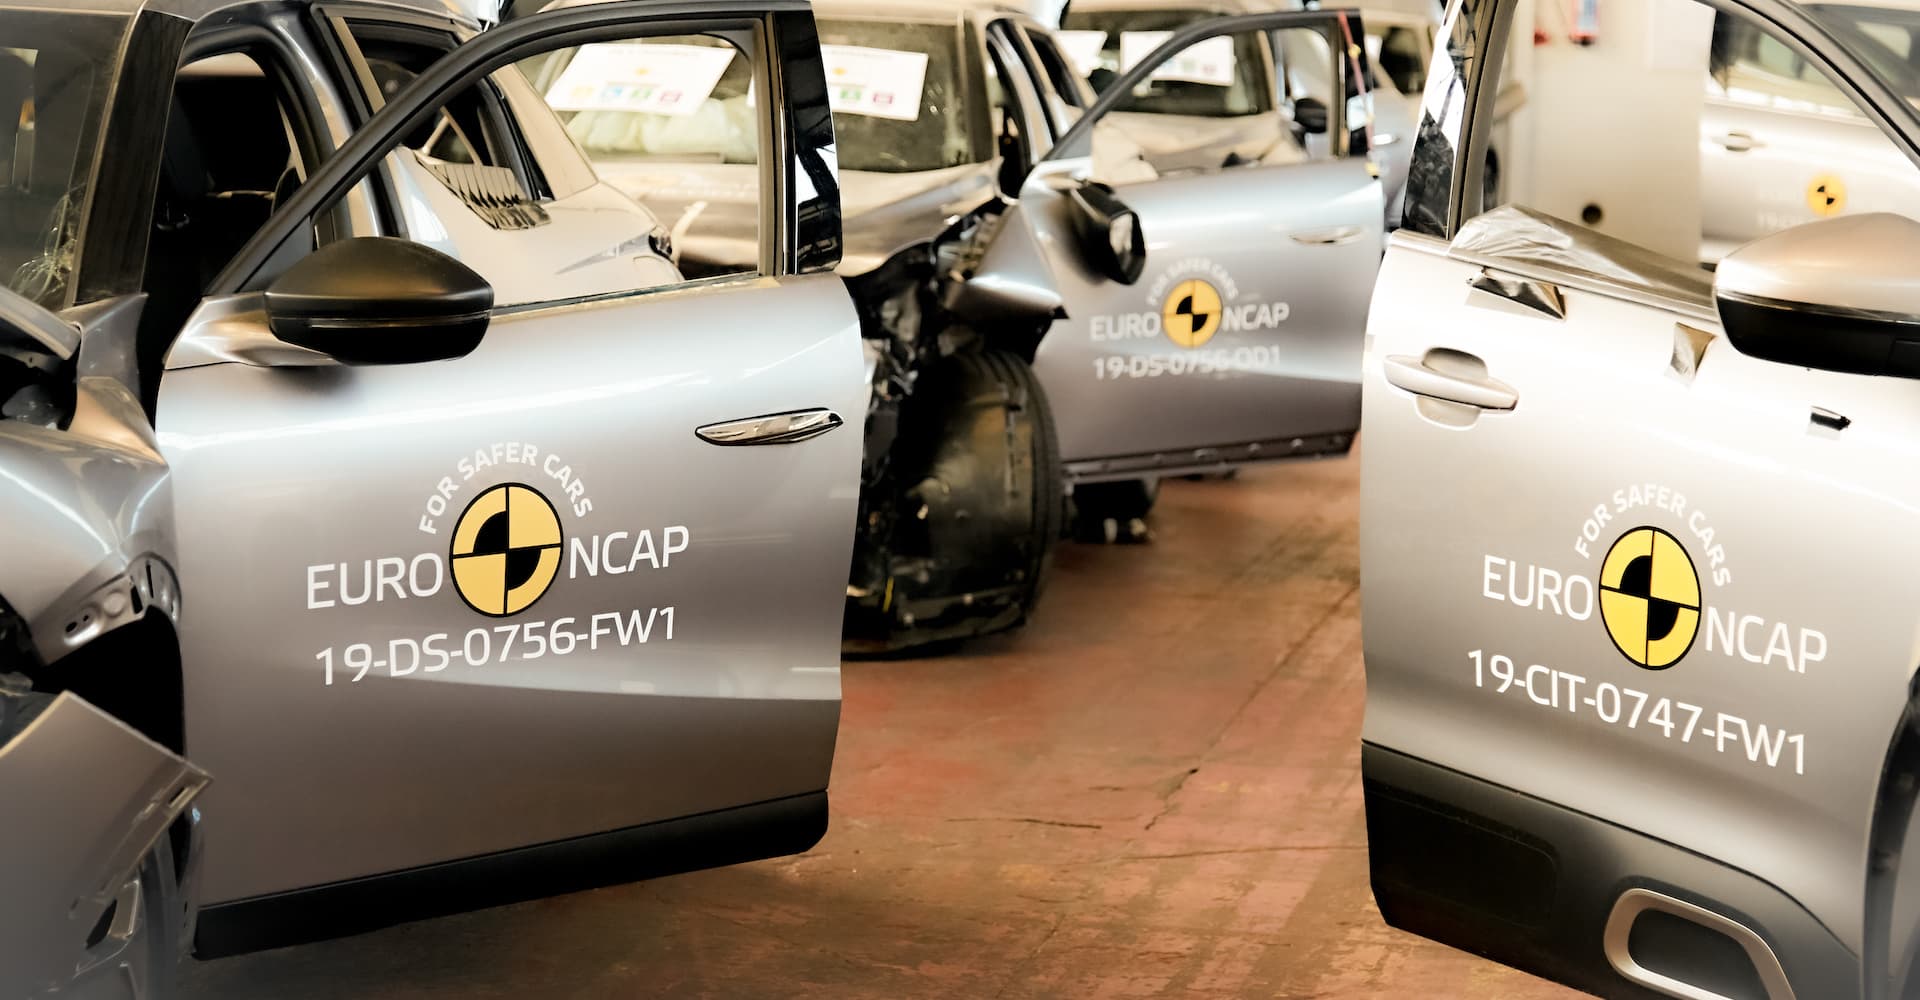 How to understand the Euro NCAP safety ratings